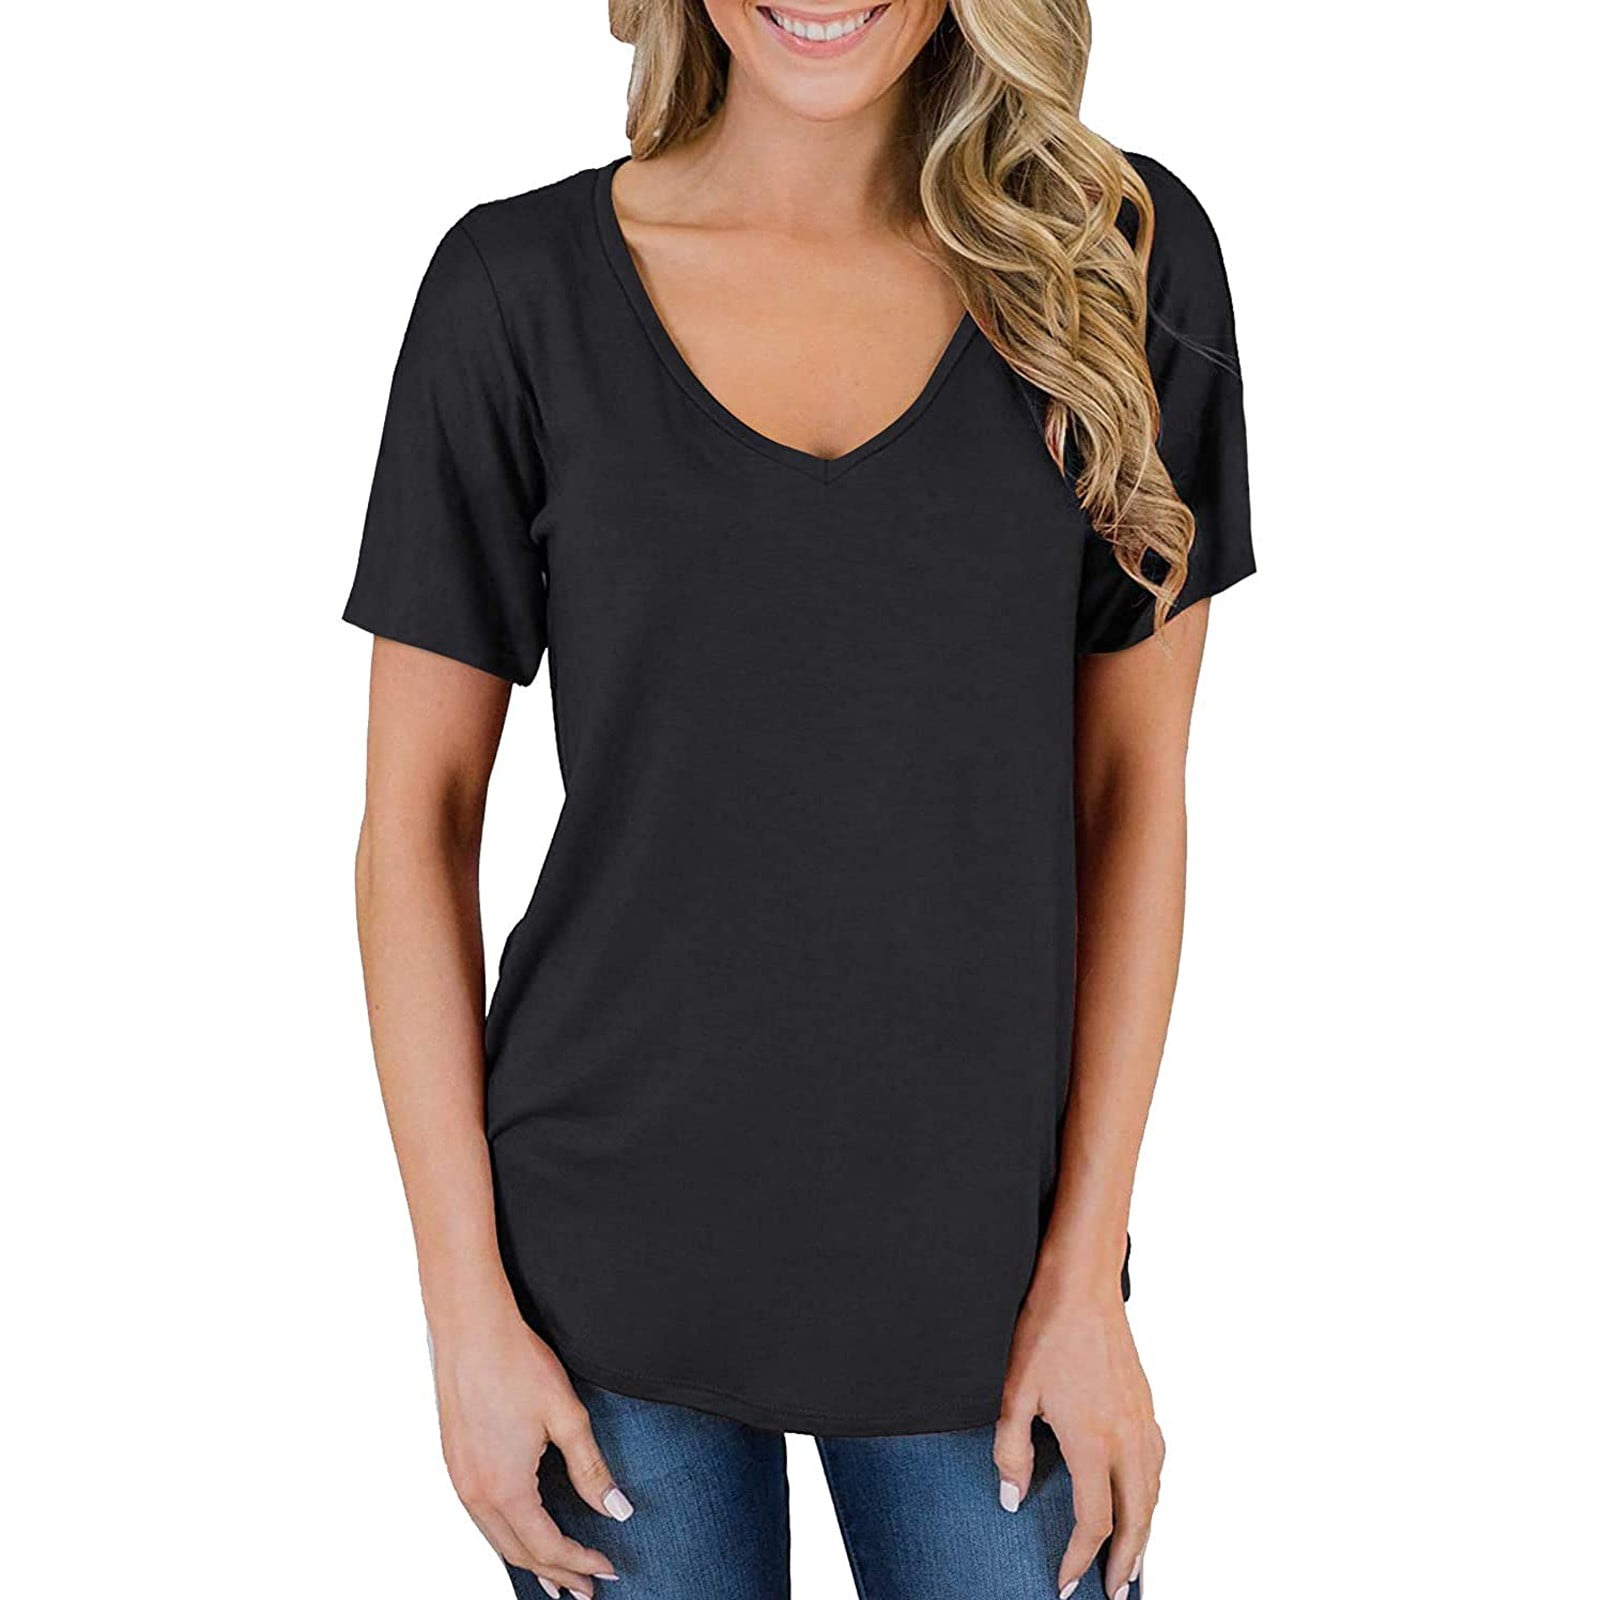 Pntutb Womens Clearance V-Neck Solid Color Loose Short-Sleeved T-Shirt ...